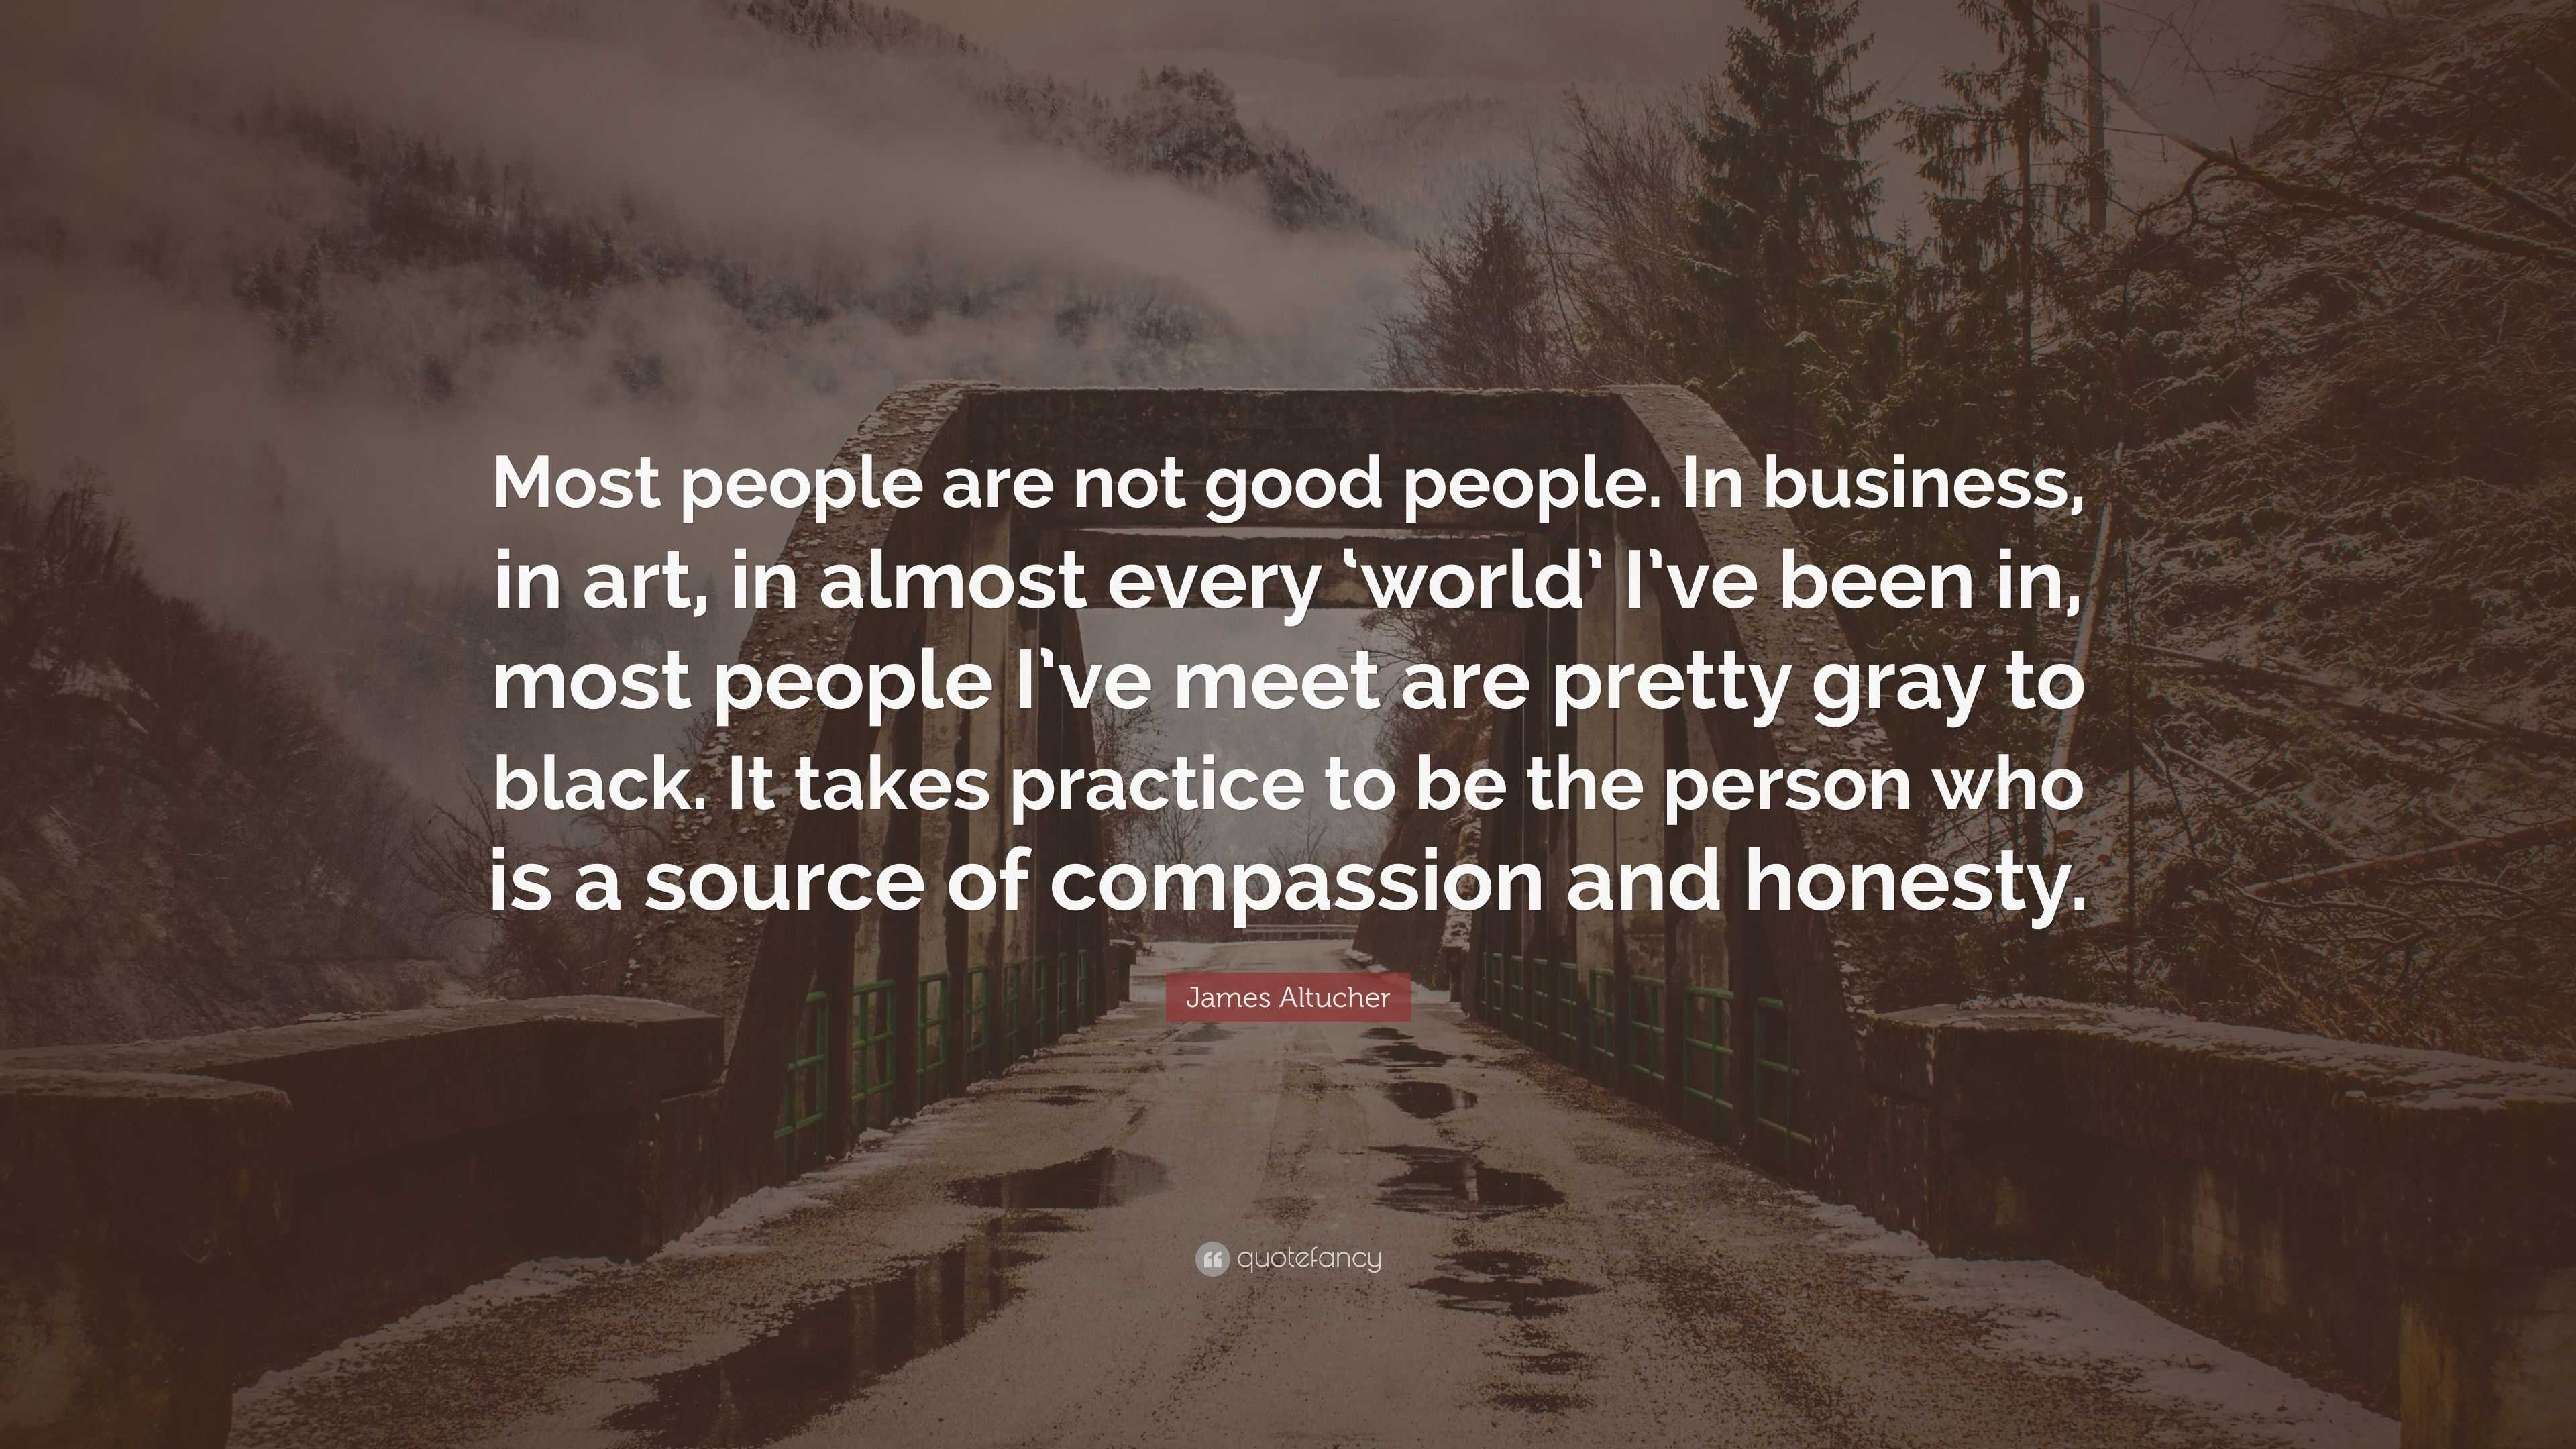 James Altucher Quote: “Most people are not good people. In business, in ...